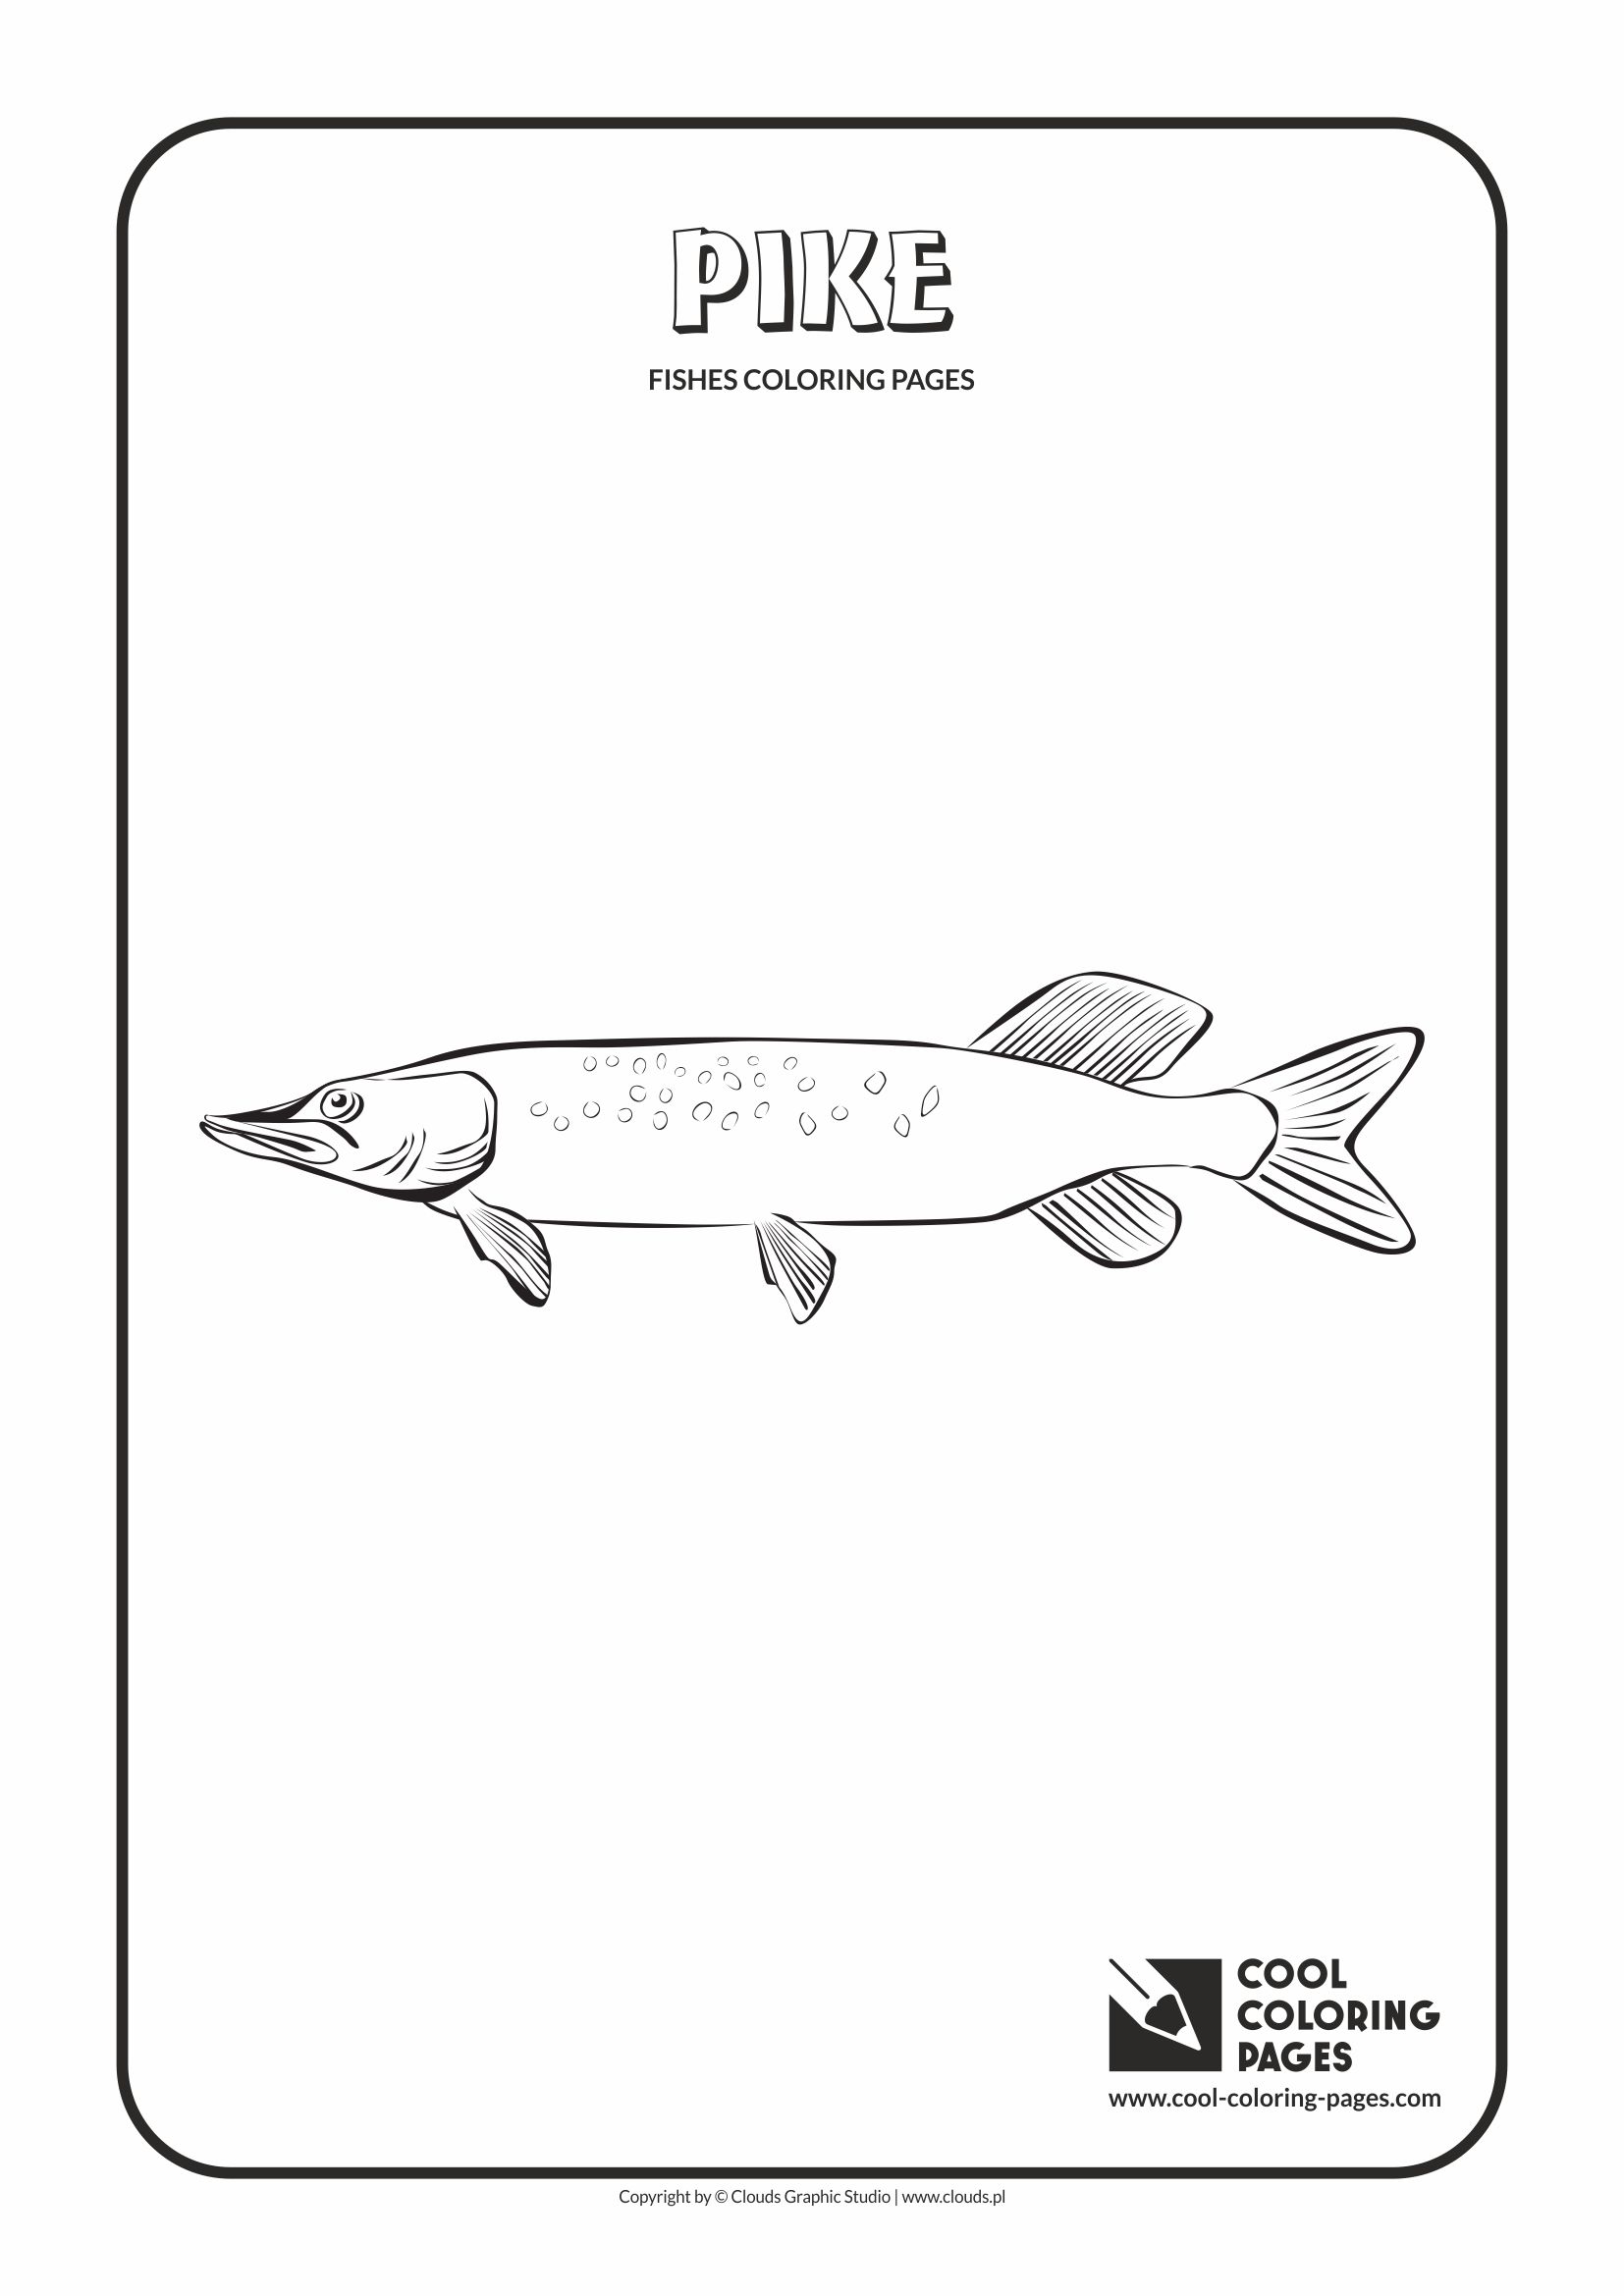 Cool Coloring Pages - Animals / Pike / Coloring page with pike